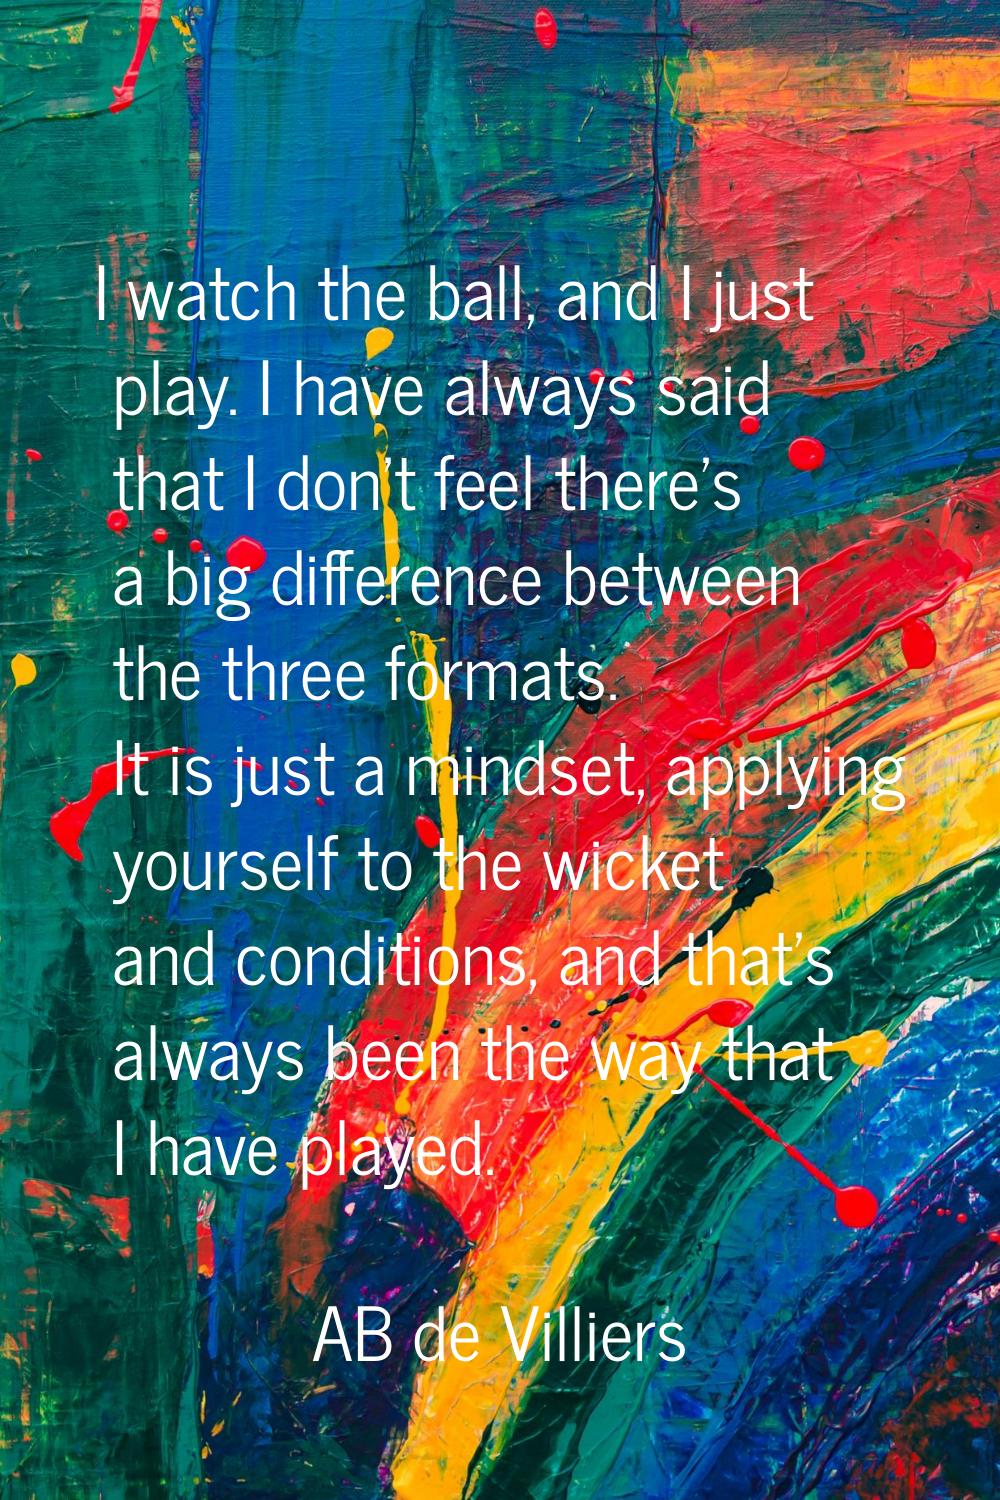 I watch the ball, and I just play. I have always said that I don't feel there's a big difference be